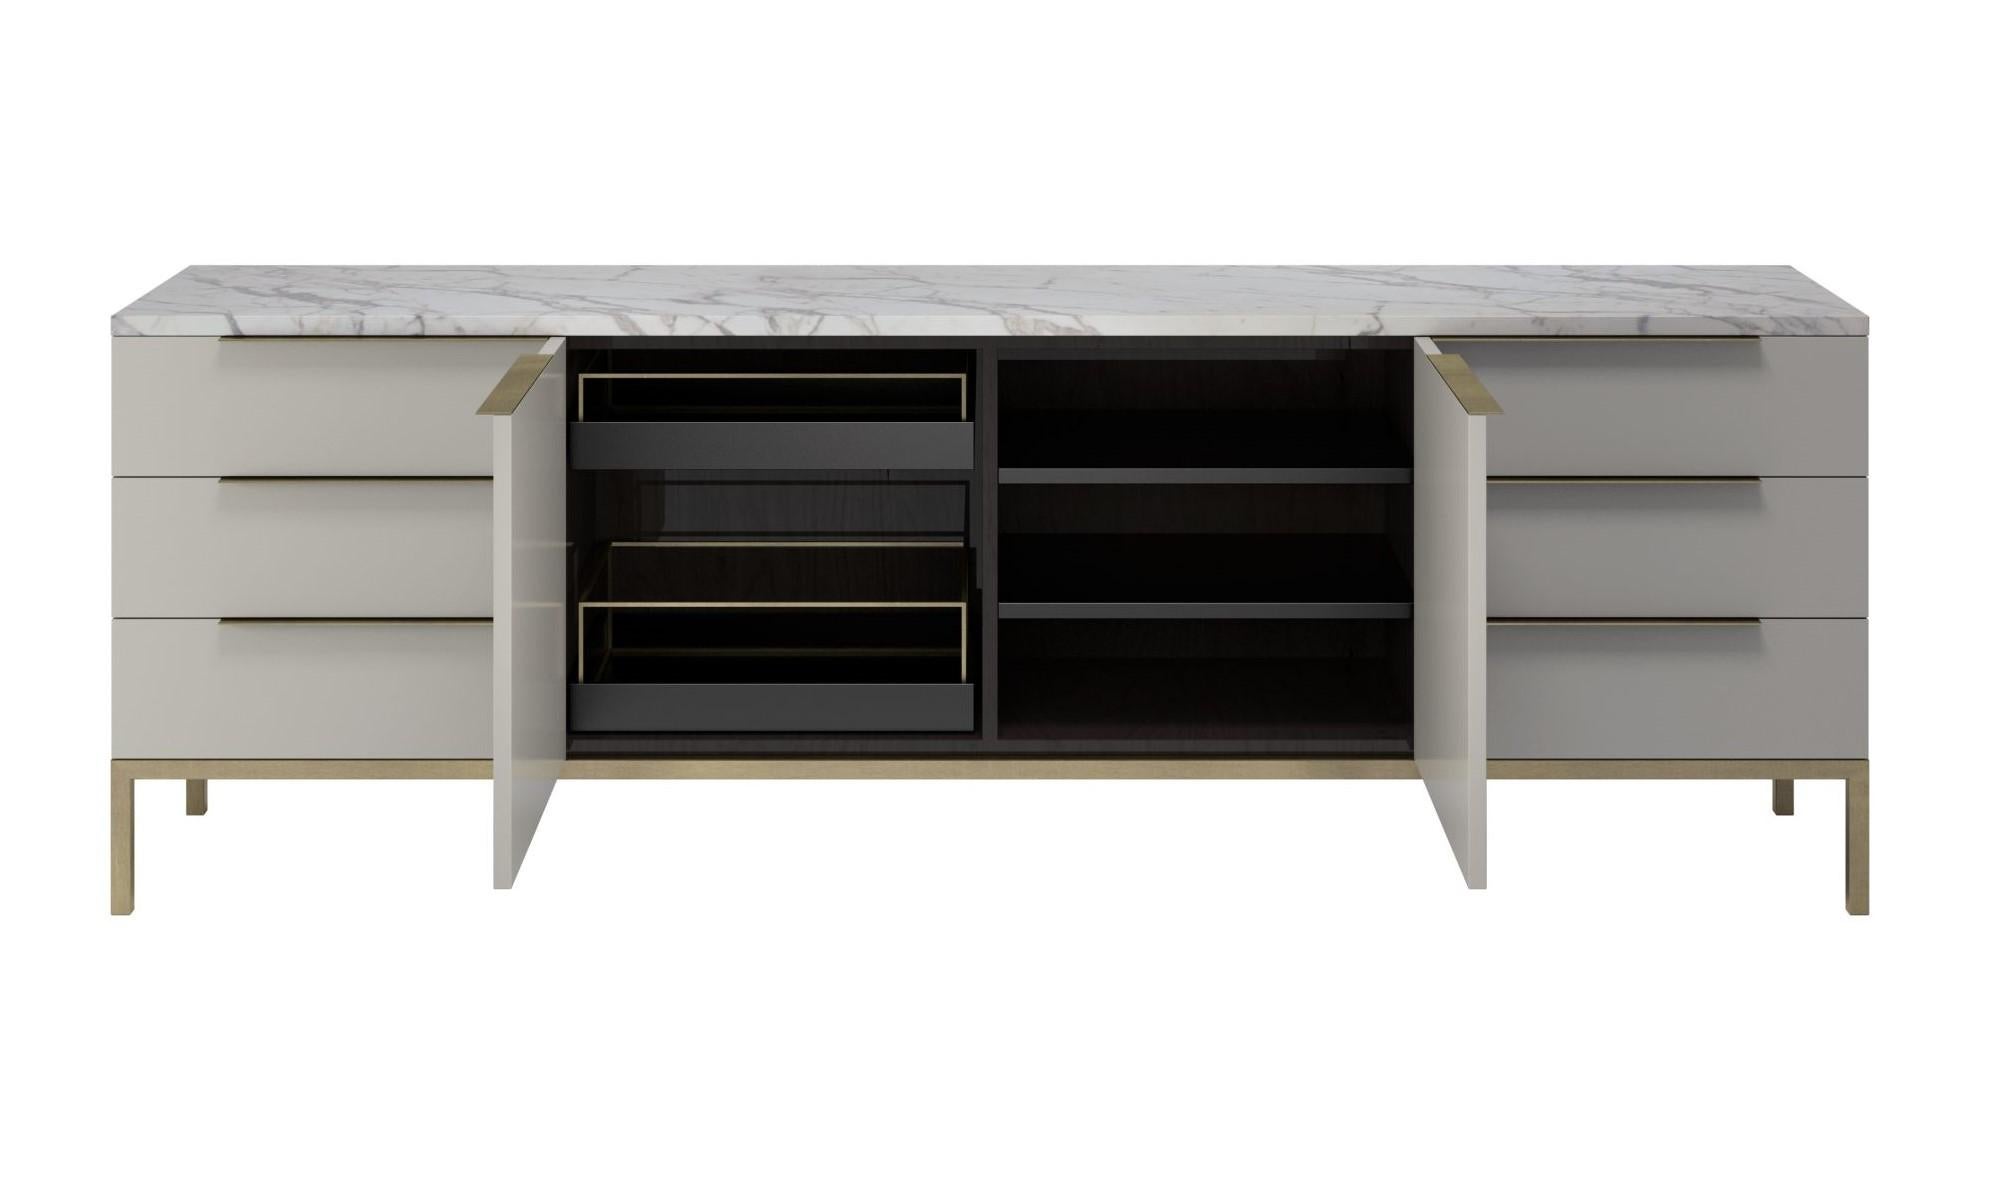 The straight lines that characterize the All Night long sideboard highlight its clean and timeless design. The mix of the metallic structure with the nobility of marble reinforces the contemporary feel of the piece. Available in different finishes